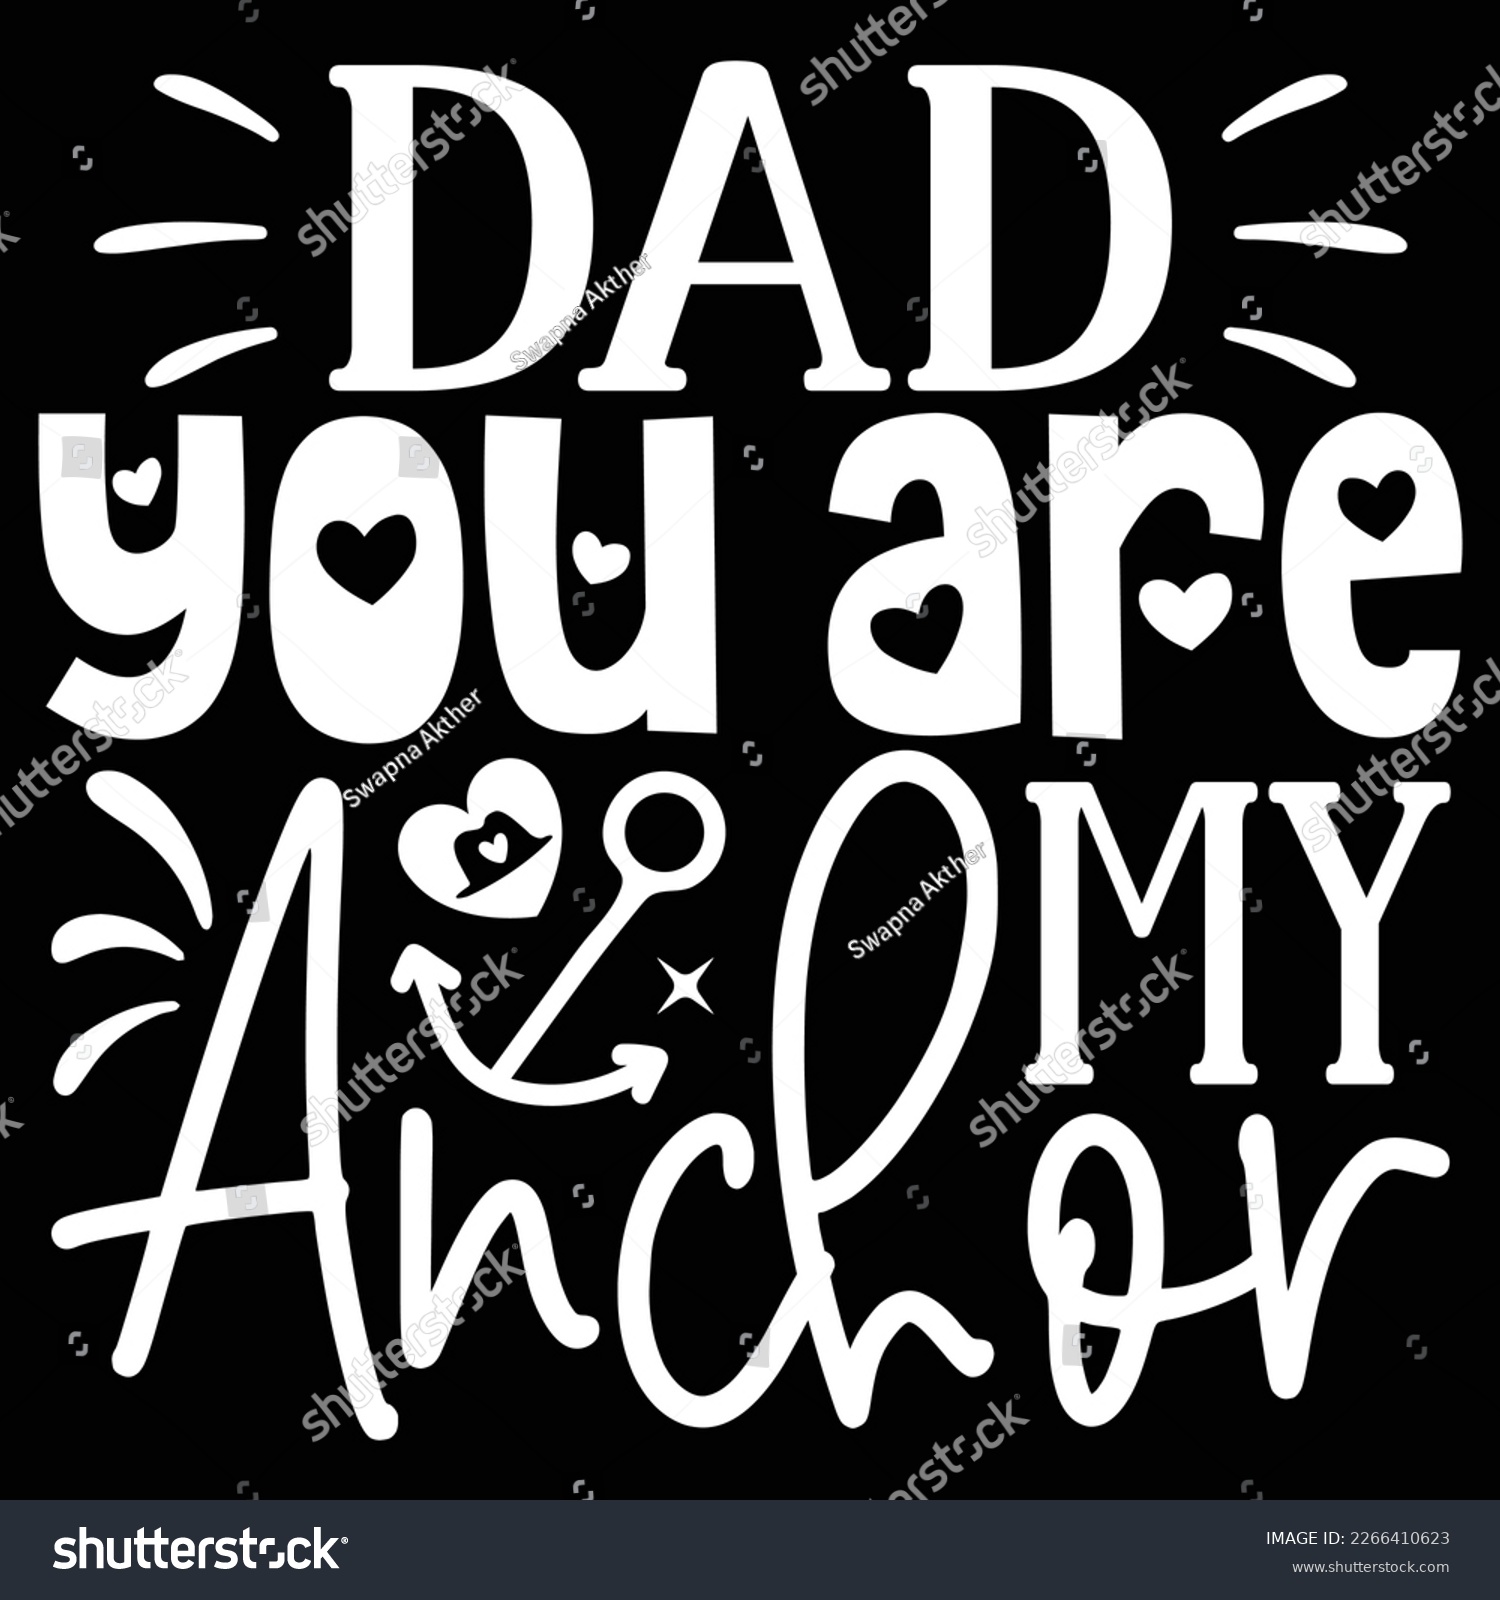 SVG of Dad You Are My Anchor - Dad Retro T-shirt And SVG Design. Retro Happy Father's Day, Motivational Inspirational SVG Quotes T shirt Design, Vector EPS Editable Files. svg